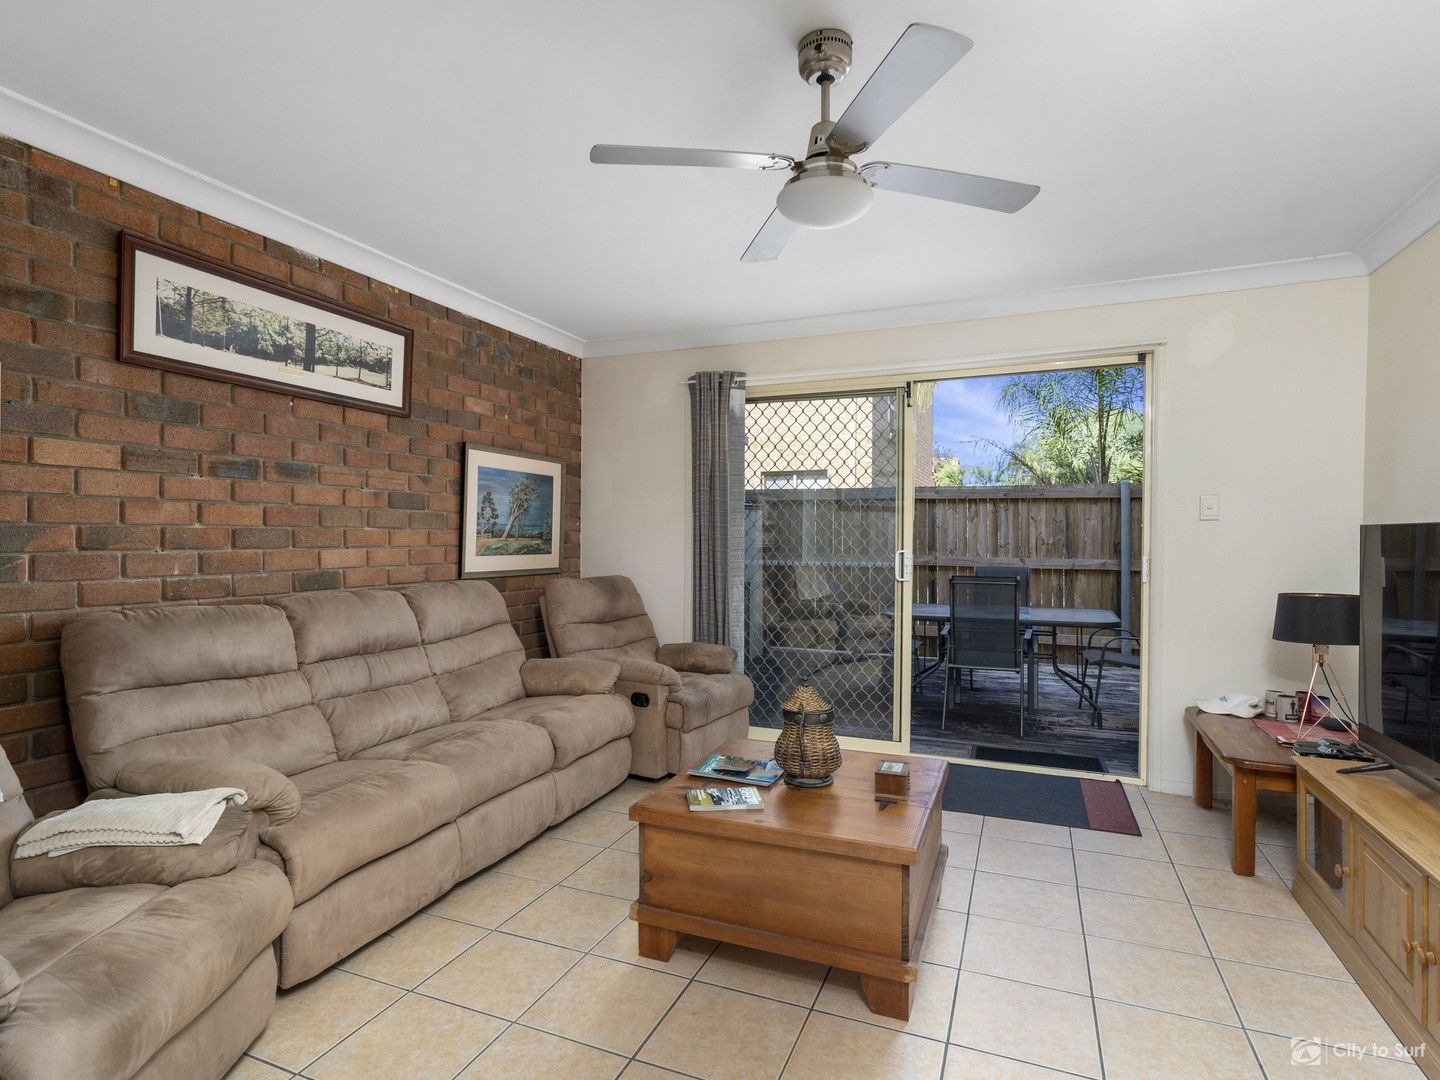 2 bedrooms Apartment / Unit / Flat in 16/26 Pine Avenue BEENLEIGH QLD, 4207